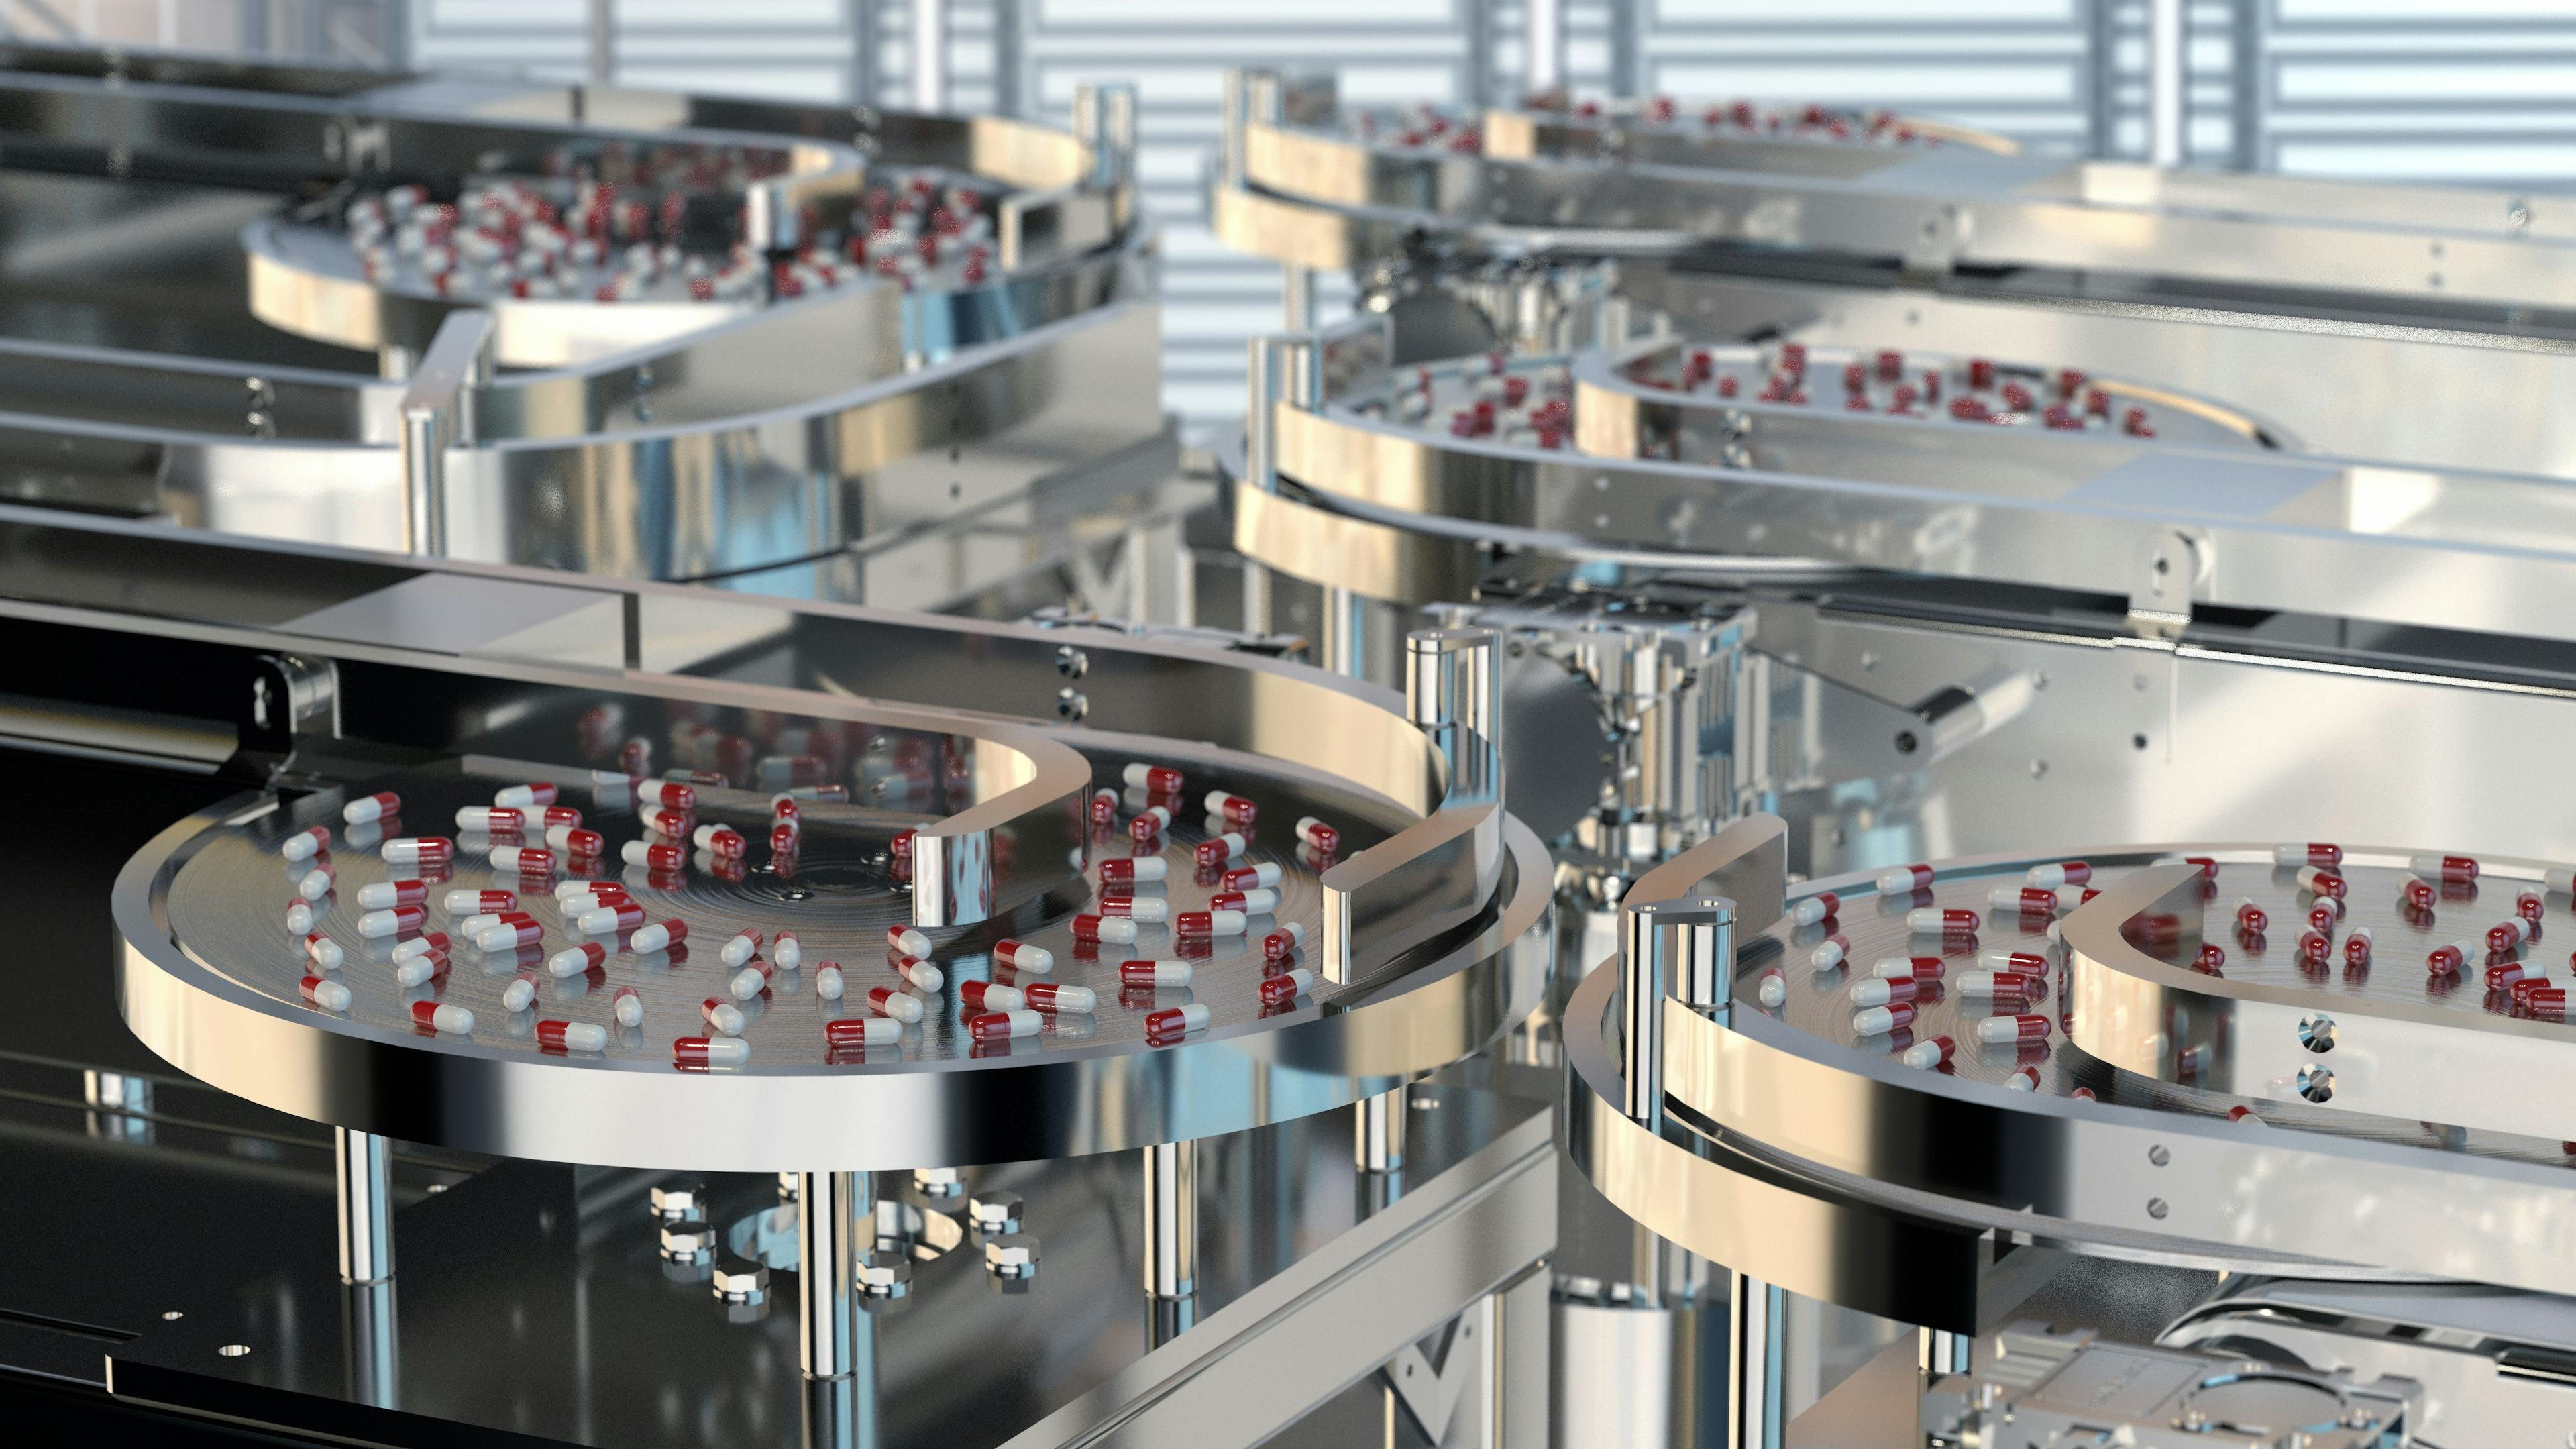 Factory of the pharmaceutical industry. Pills on the conveyor | Image Credit: © Mike Mareen - stock.adobe.com